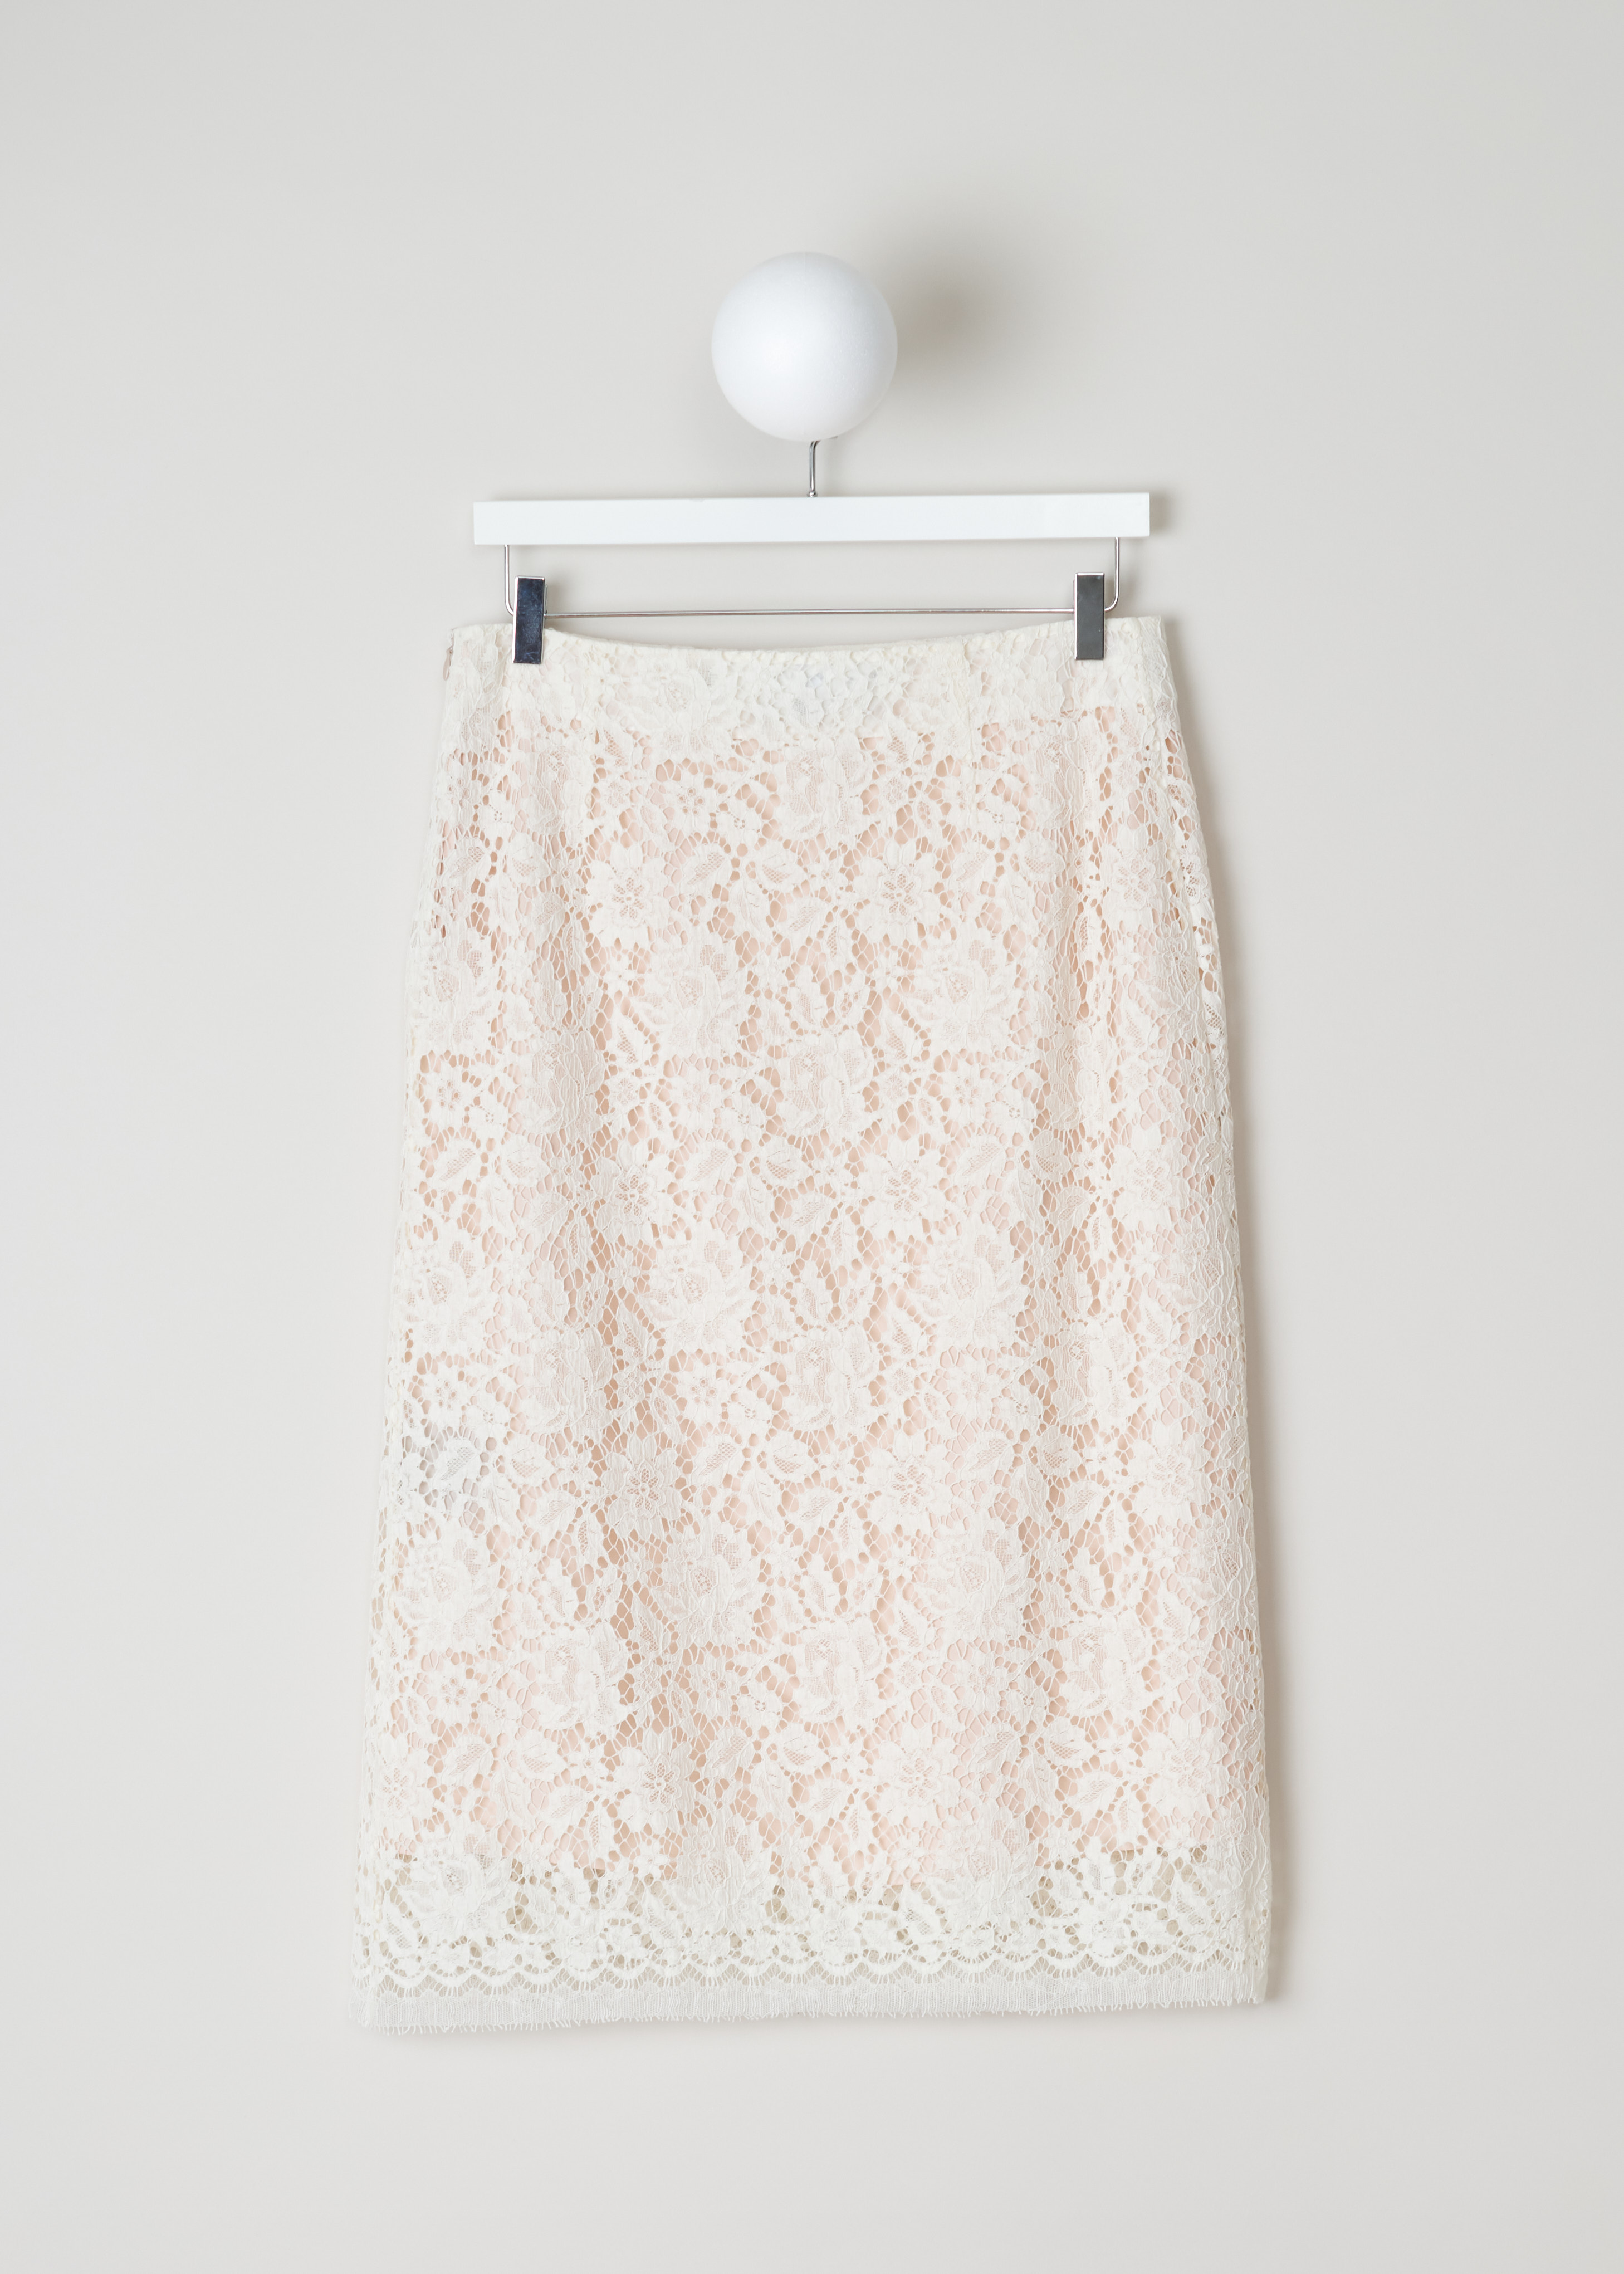 Calvin Klein 205W39NYC off-white lace skirt 81WWSA58_C186_102 ecru back. Knee length off white lace skirt. With a nude coloured silk lining for extra depth. This straight model is high waisted and has a concealed zipper on the side.